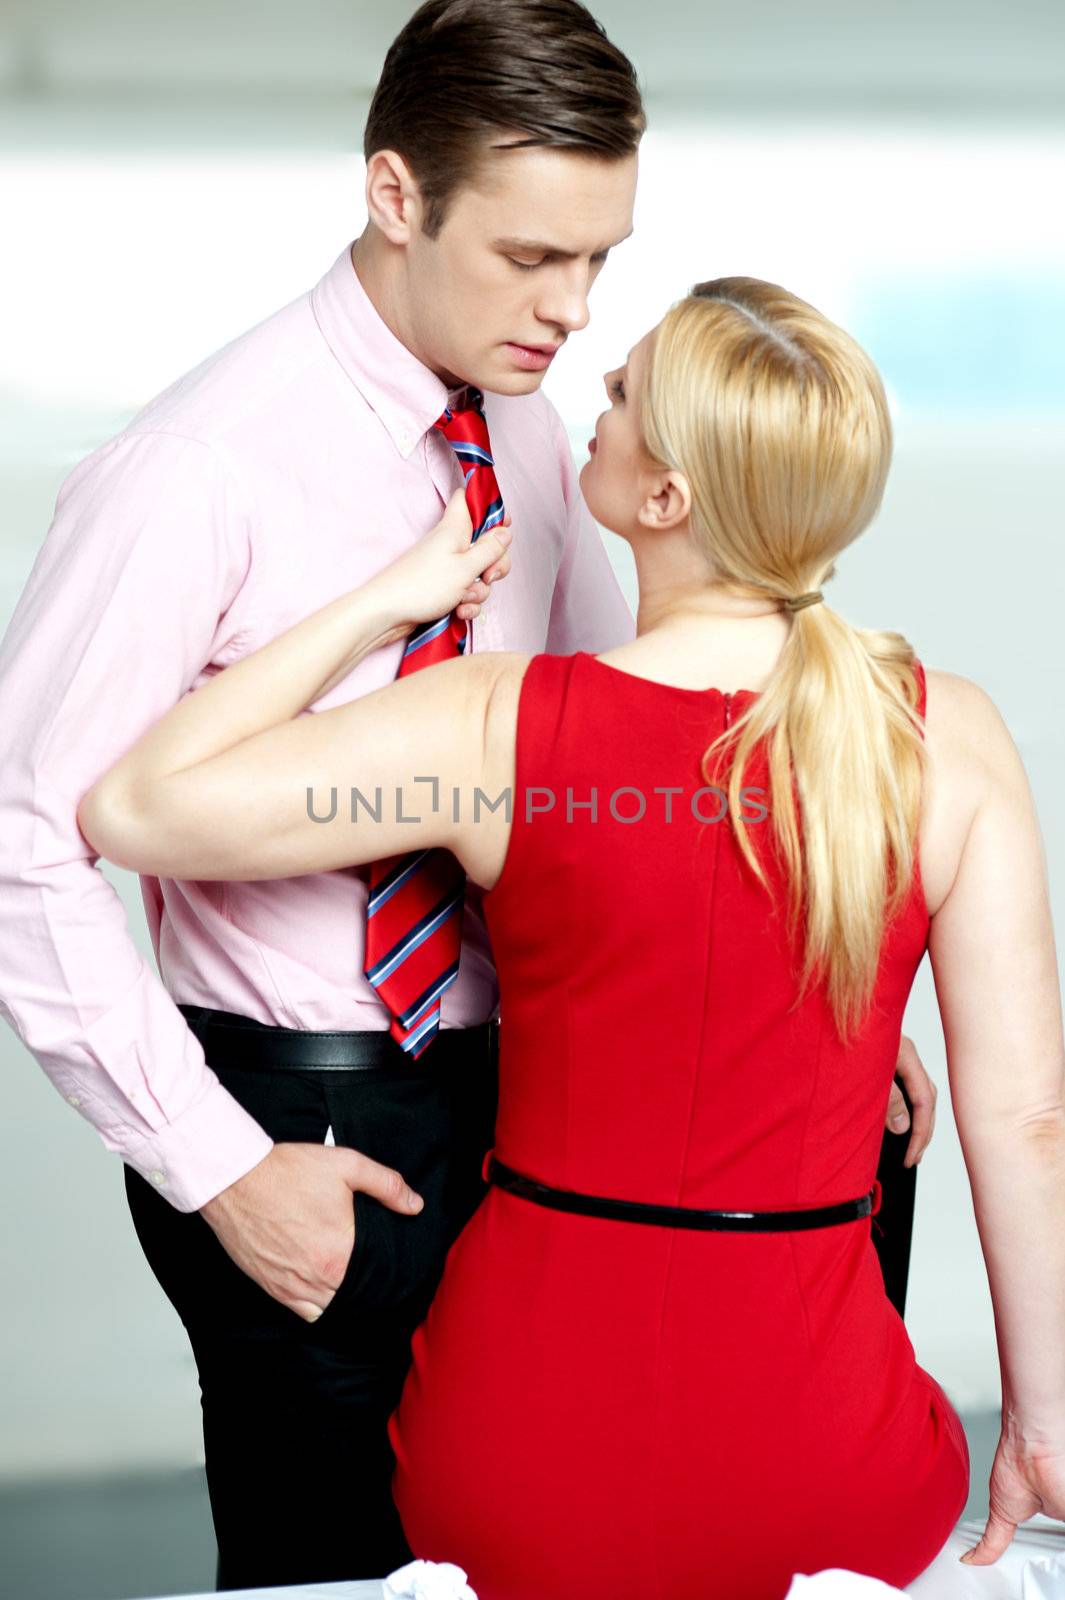 Woman pulling man from his tie. Feeling naughty by stockyimages